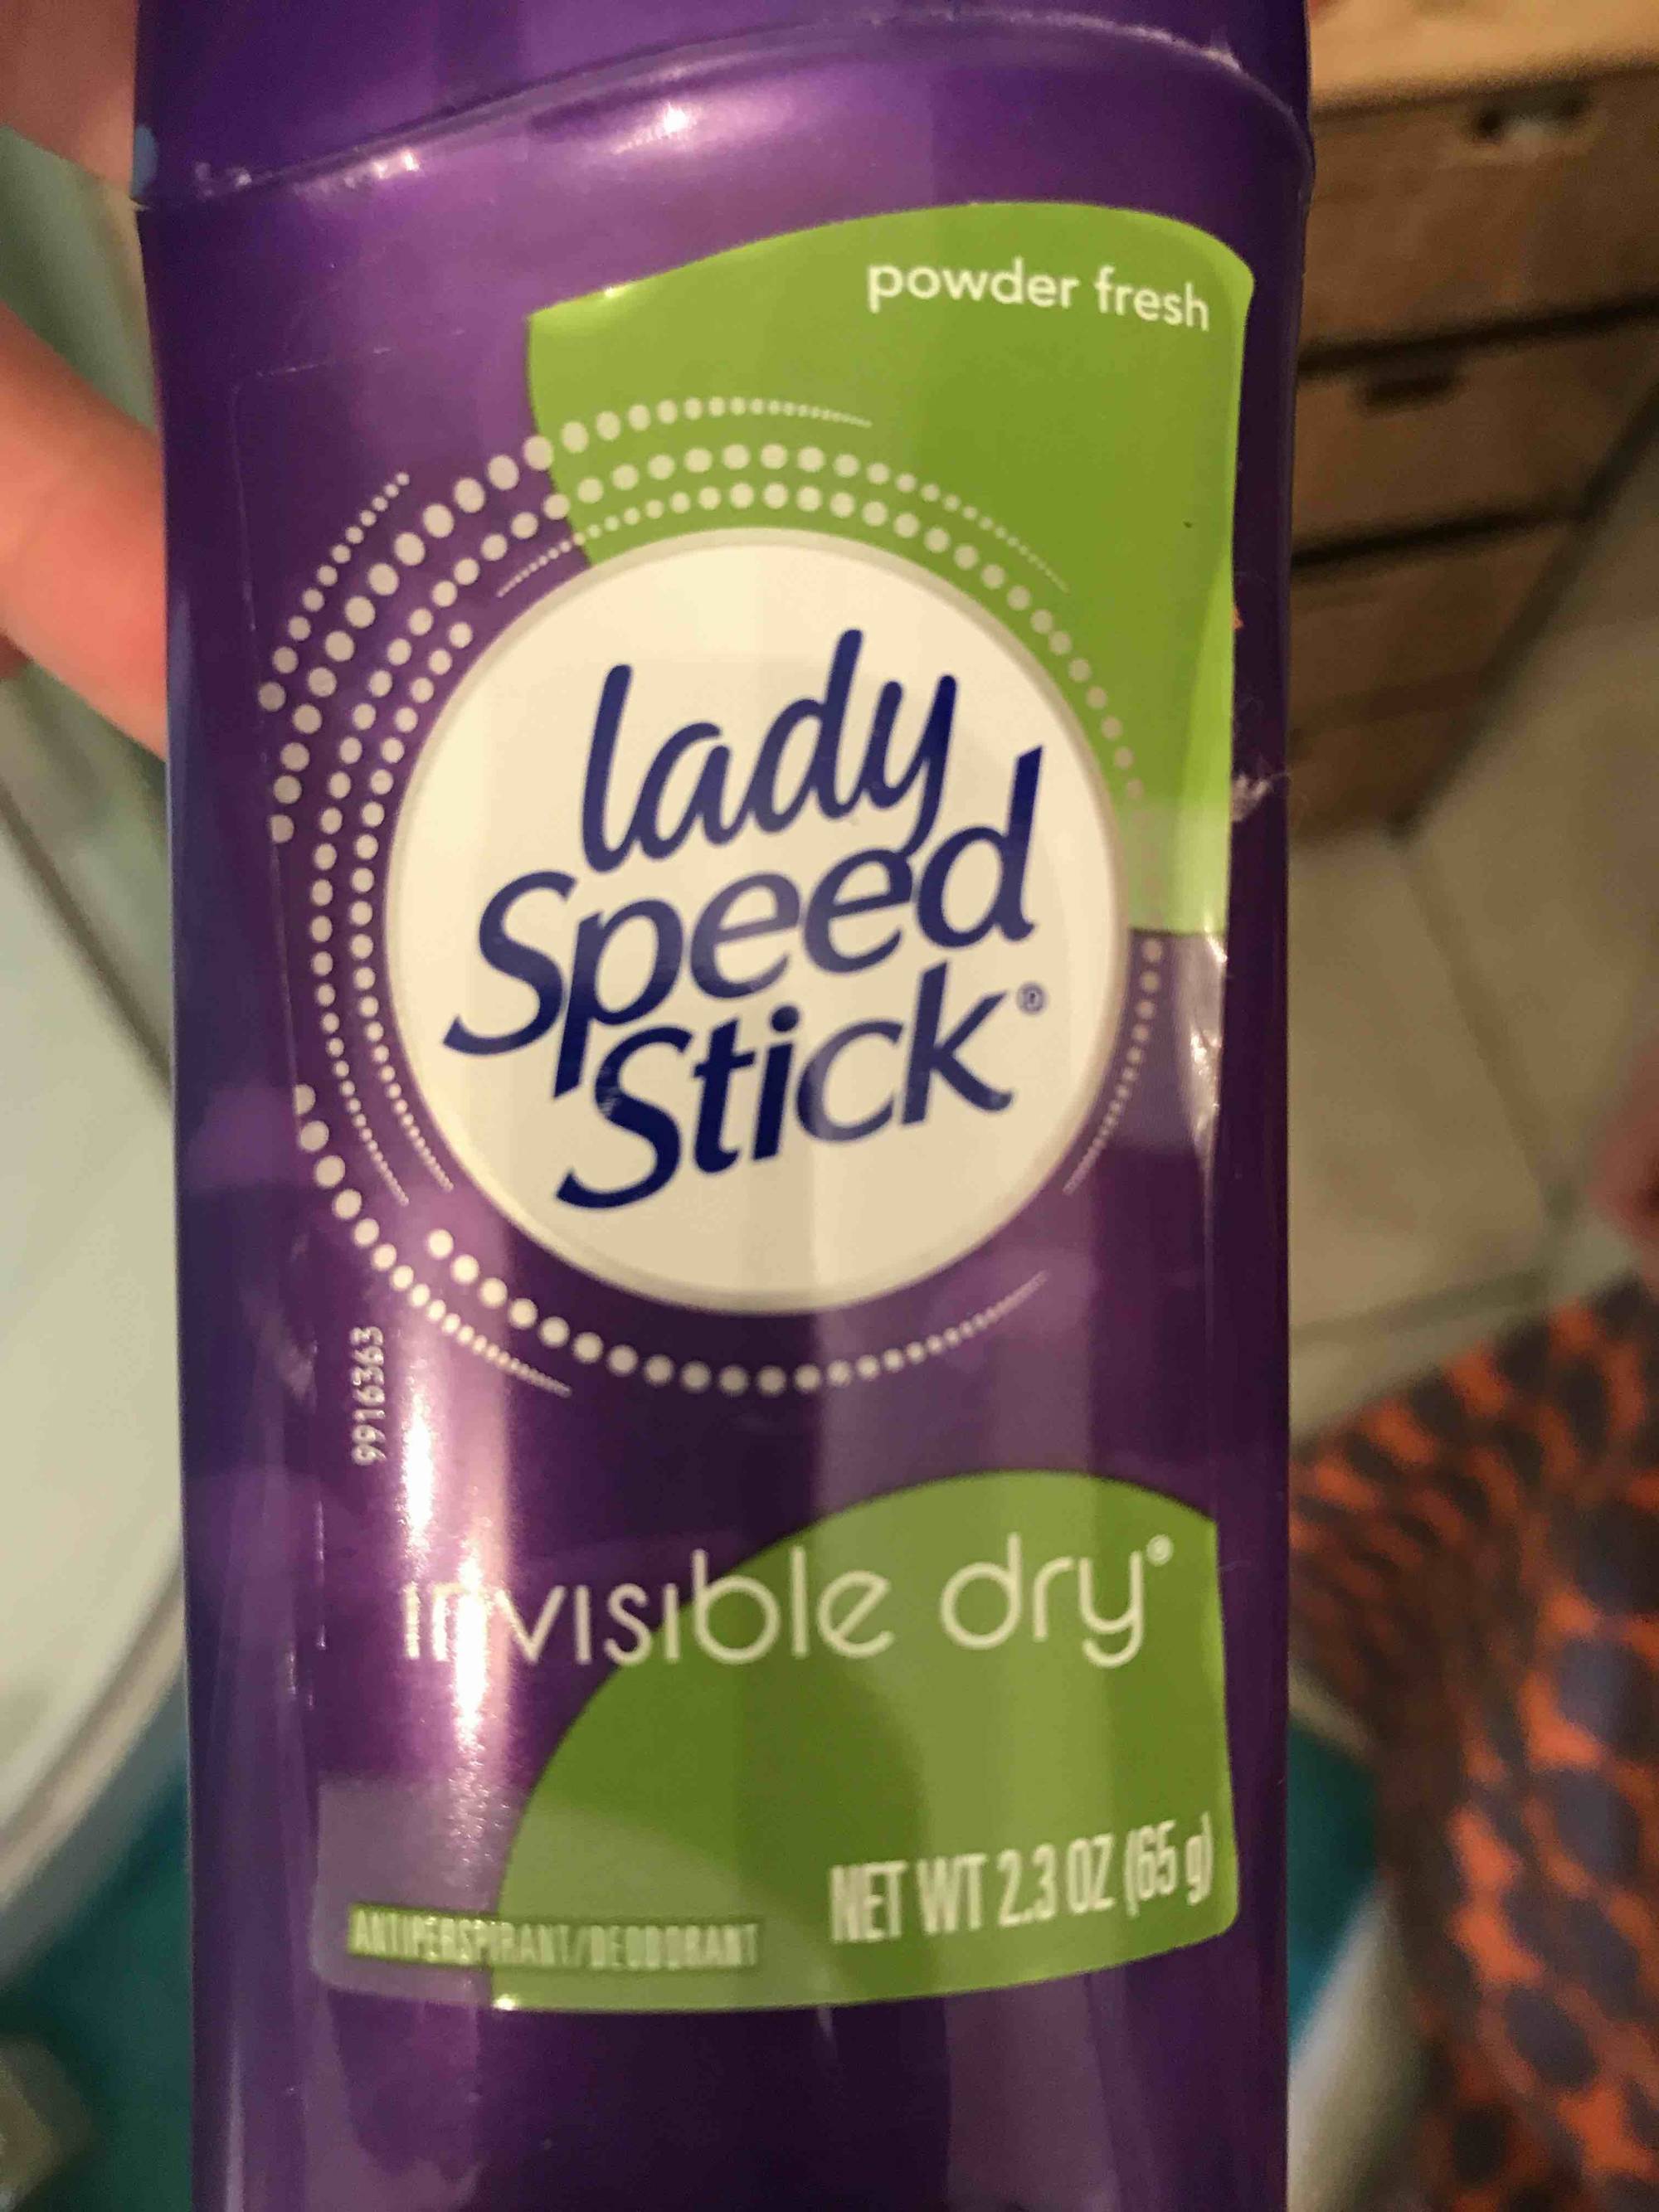 LADY SPEED STICK - Invisible dry - Déodorant powder fresh